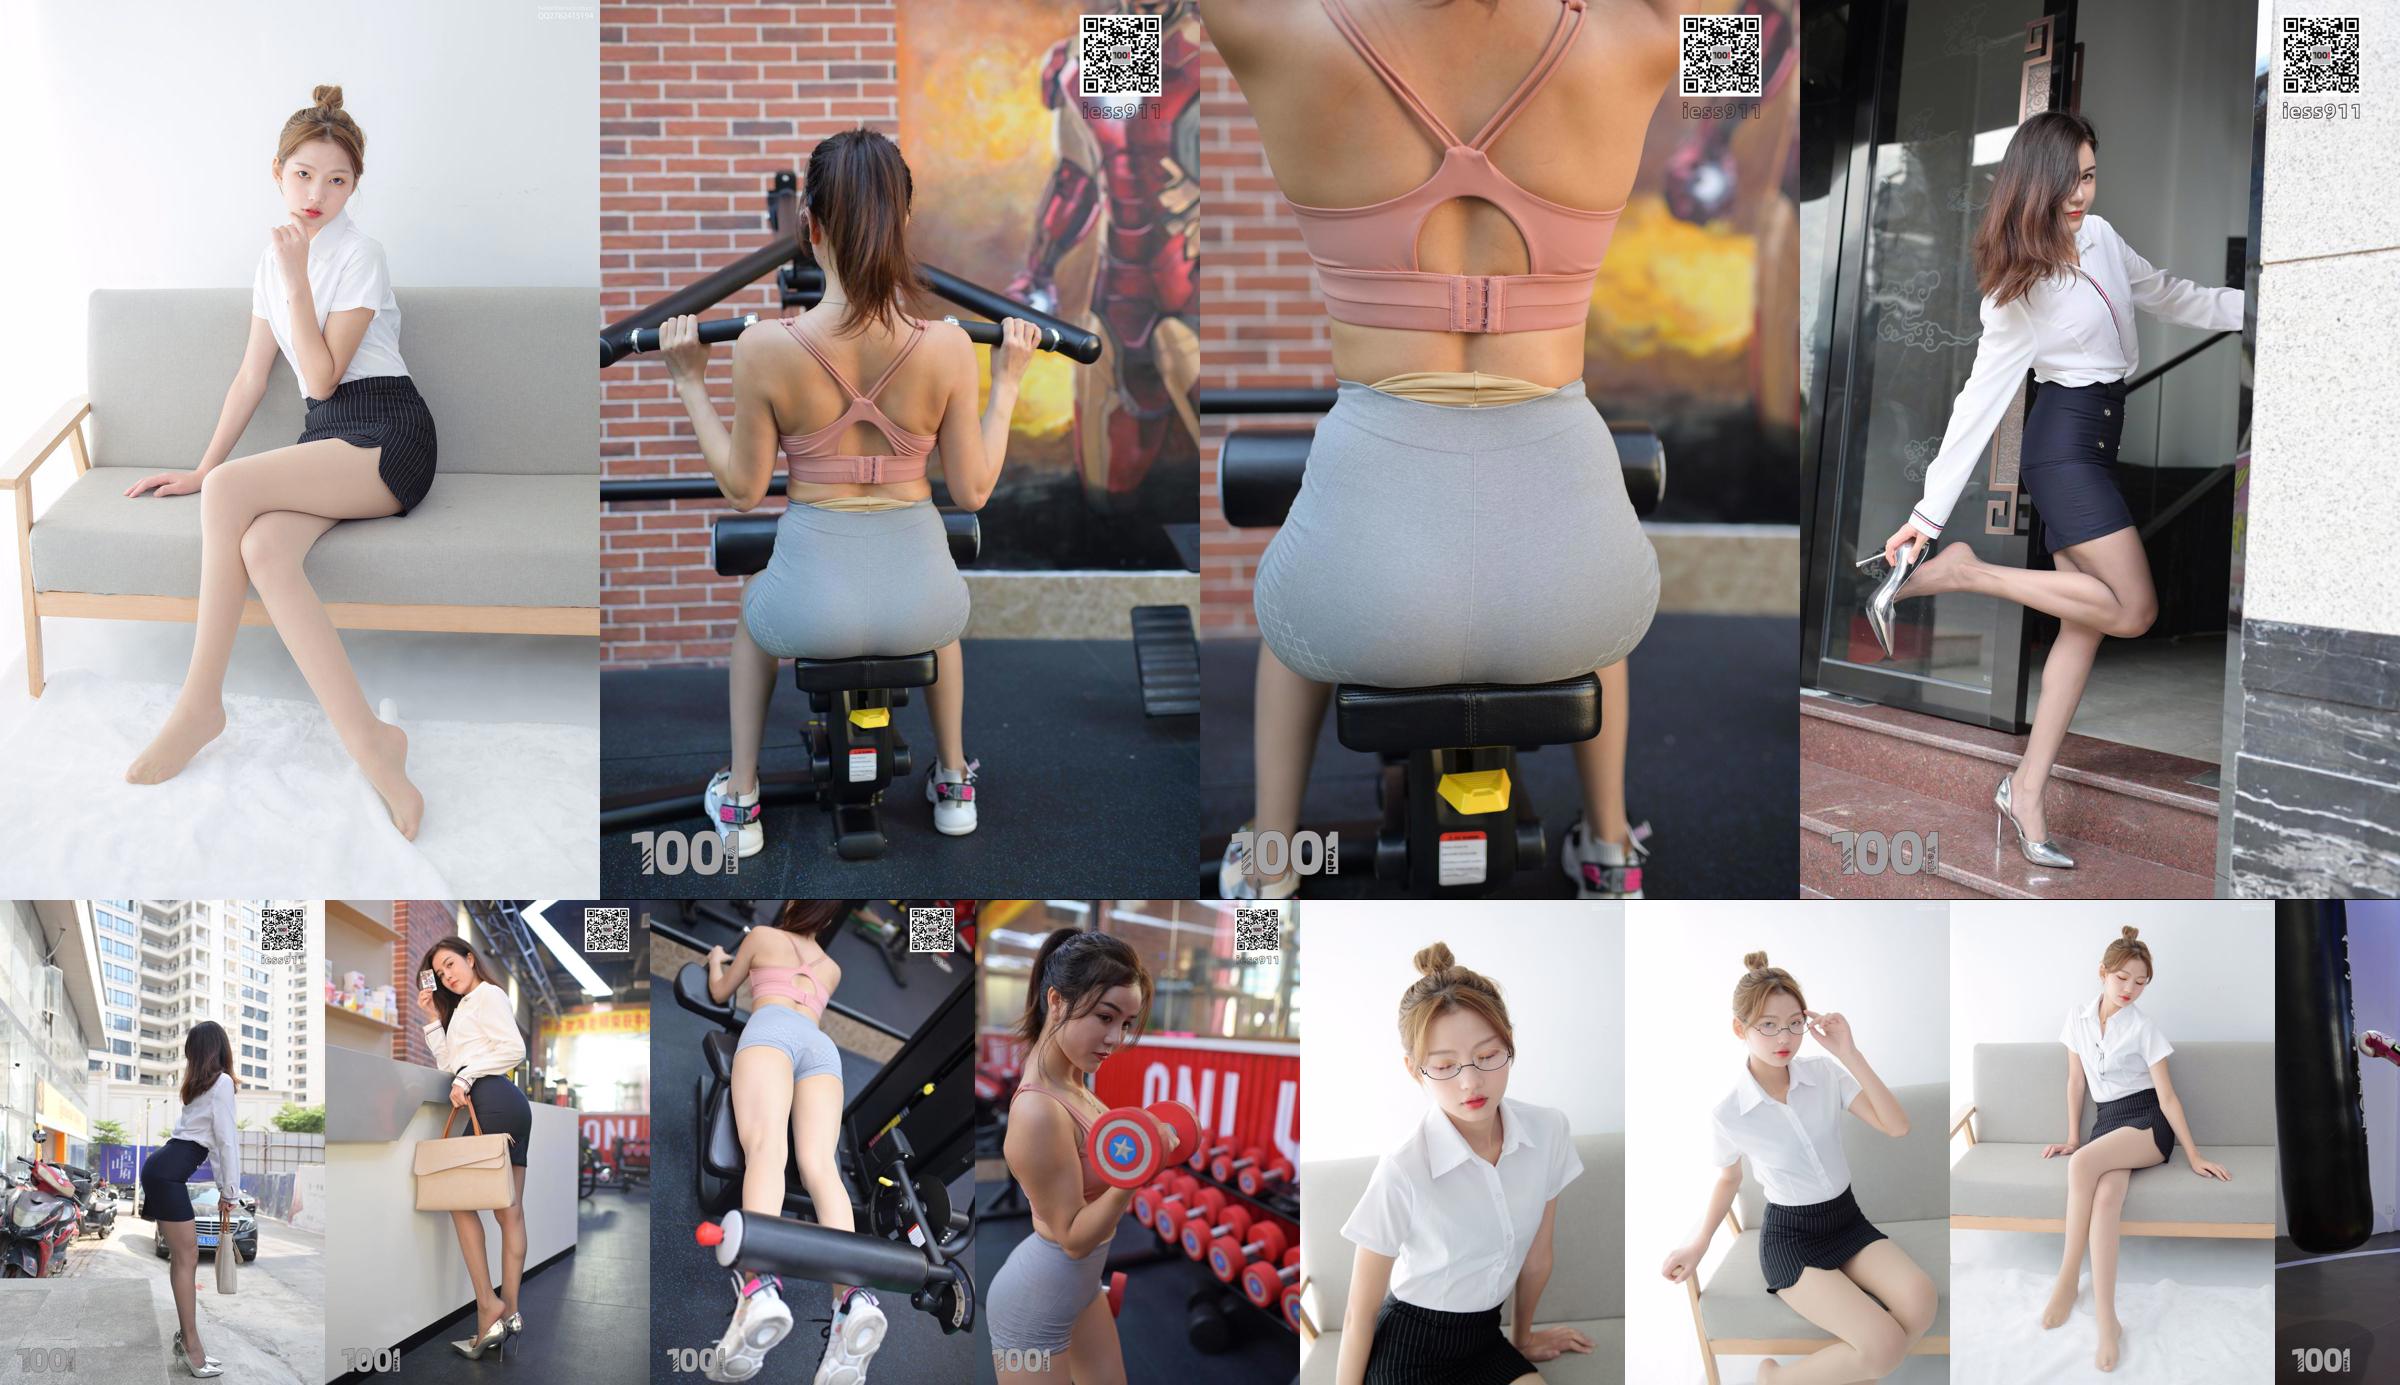 [IESS One Thousand One Nights] "OL Going Fitness After get off work 2" เรียวขาสวย No.91015d หน้า 3